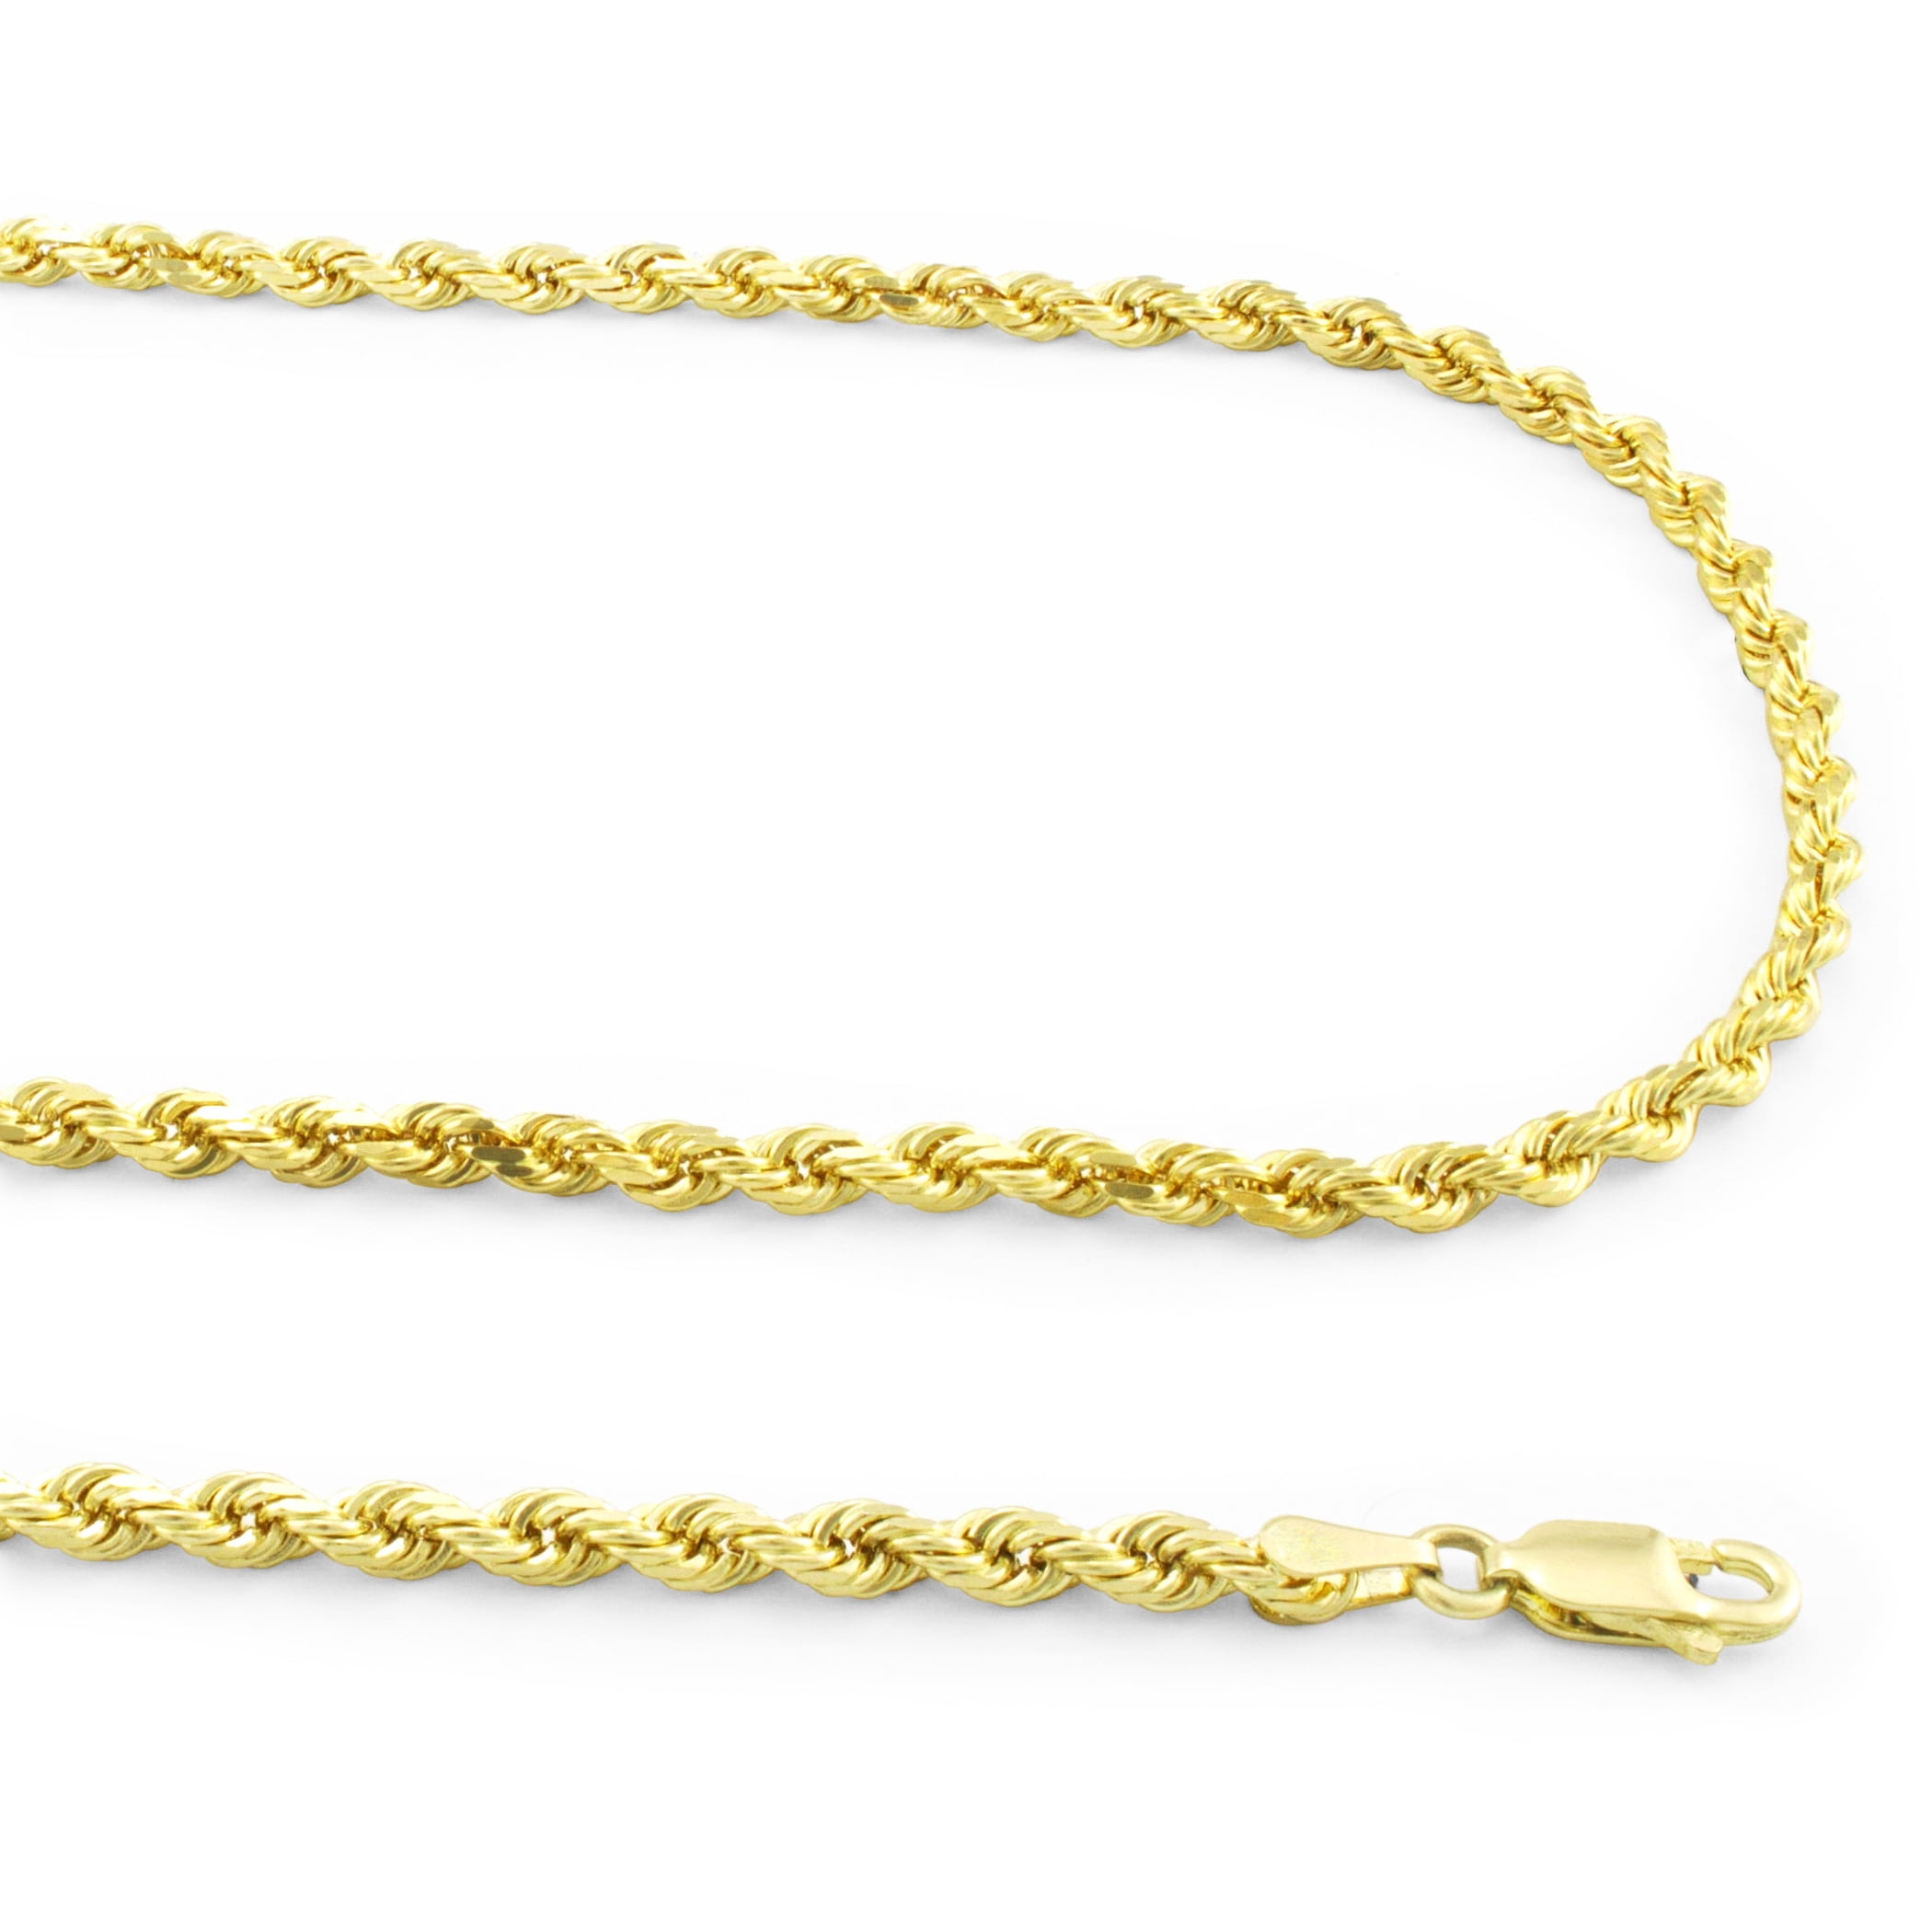 Solid Gold Hollow French Rope Light Chain Necklace 14K Yellow Gold 2mm Wide Lengths 16 to 24